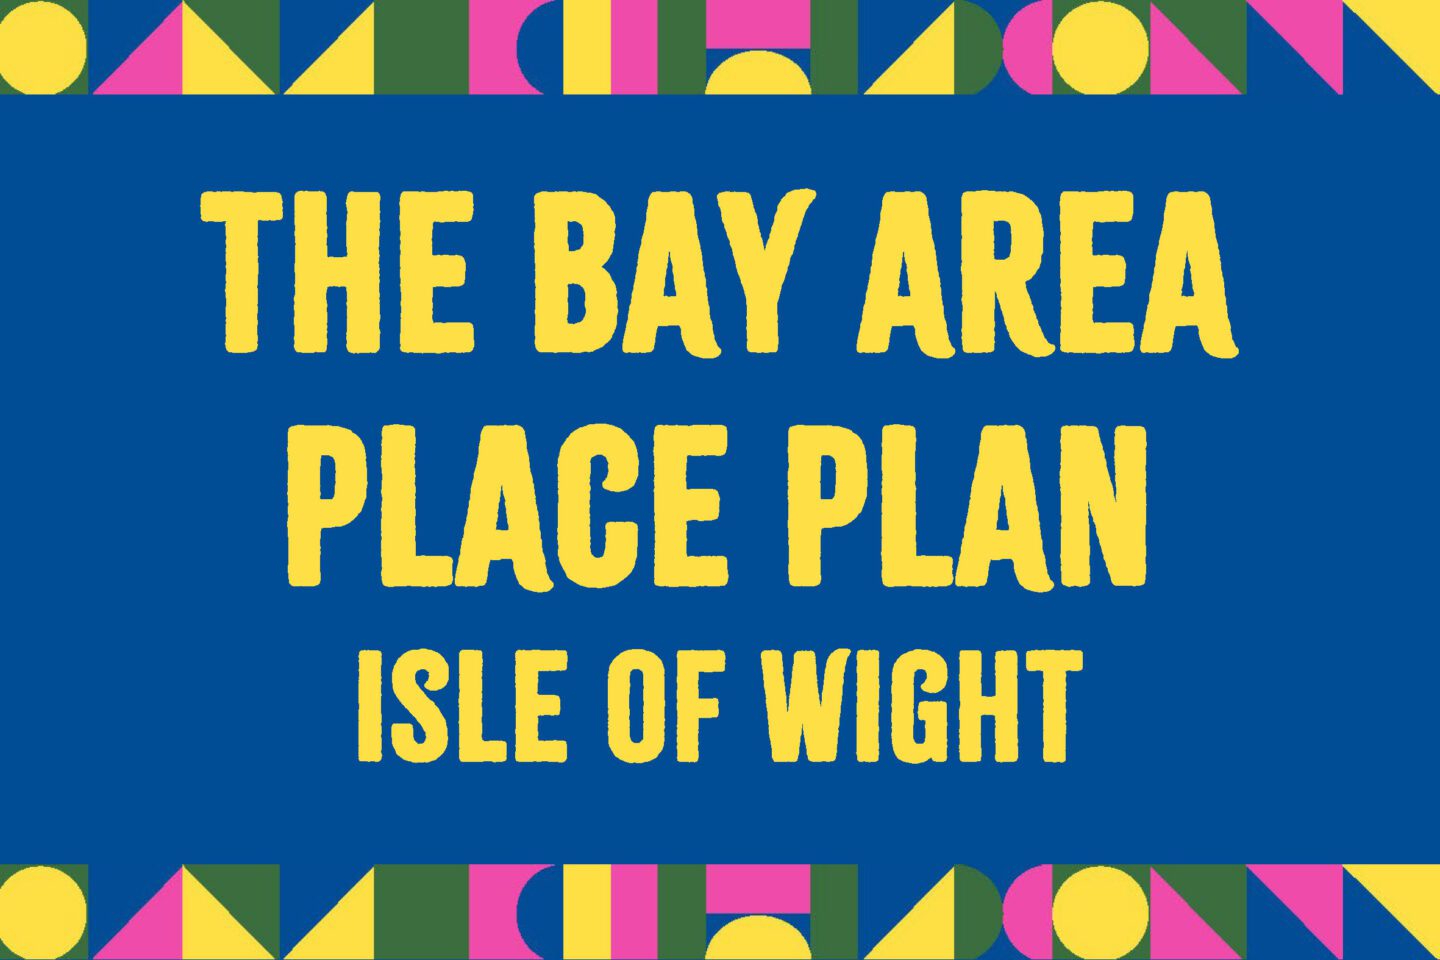 The Bay Area Place Plan